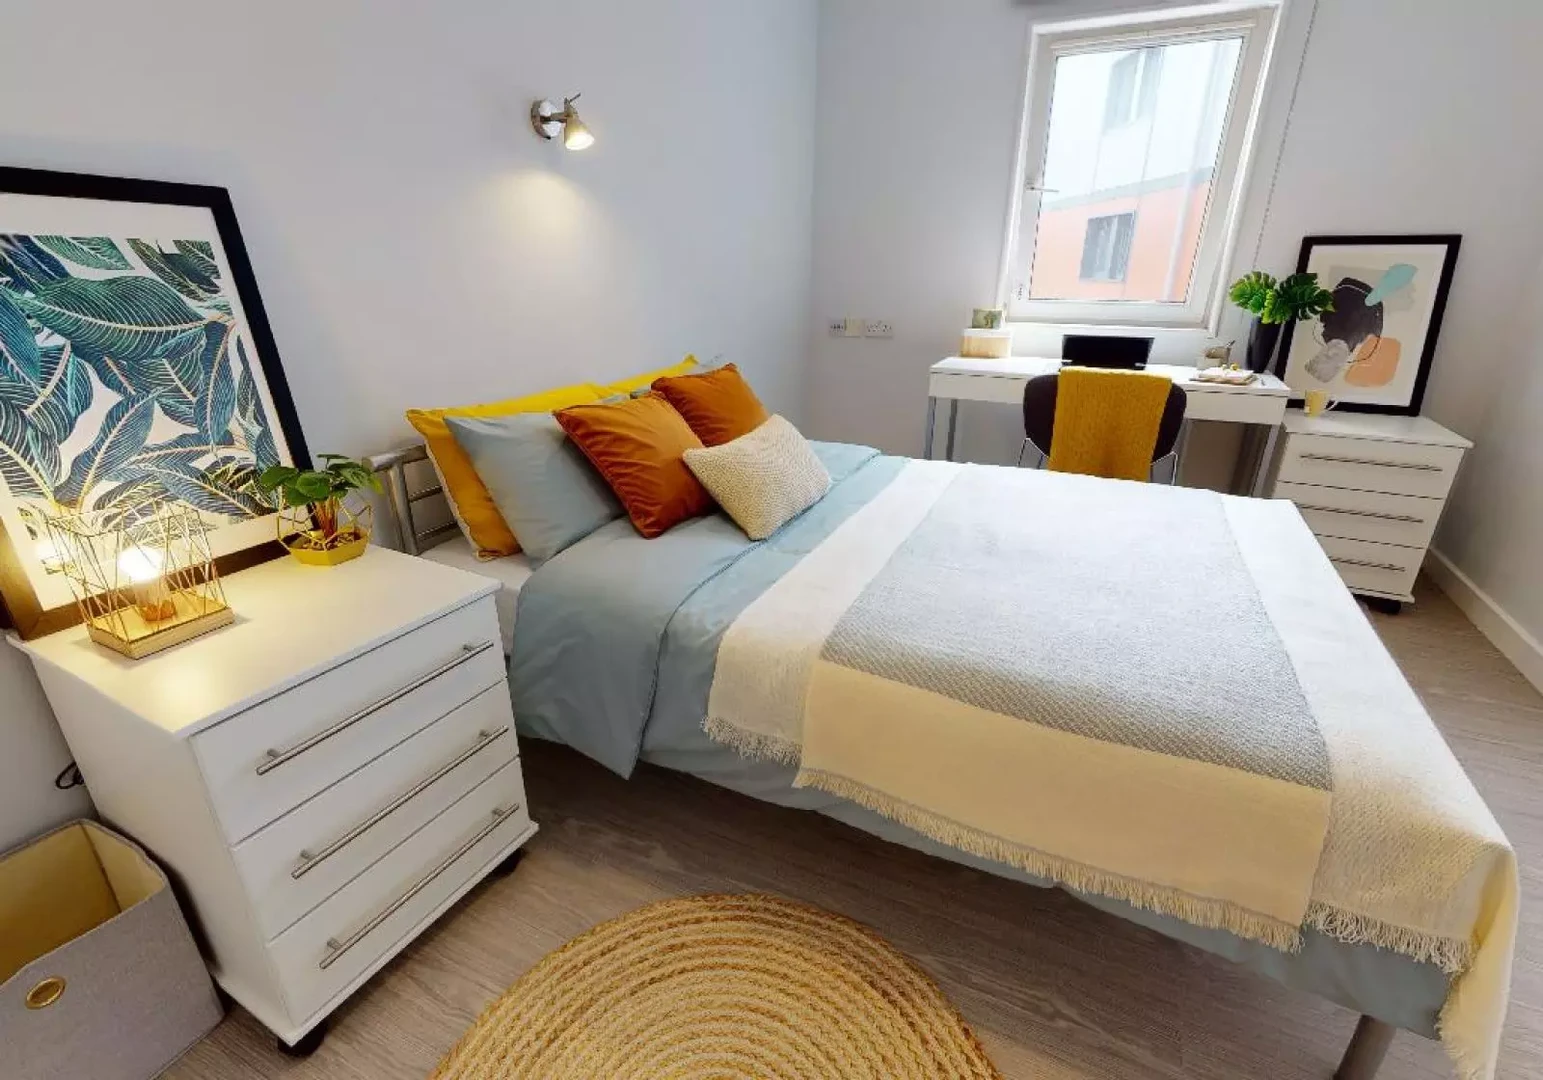 Two bedroom accommodation in Manchester